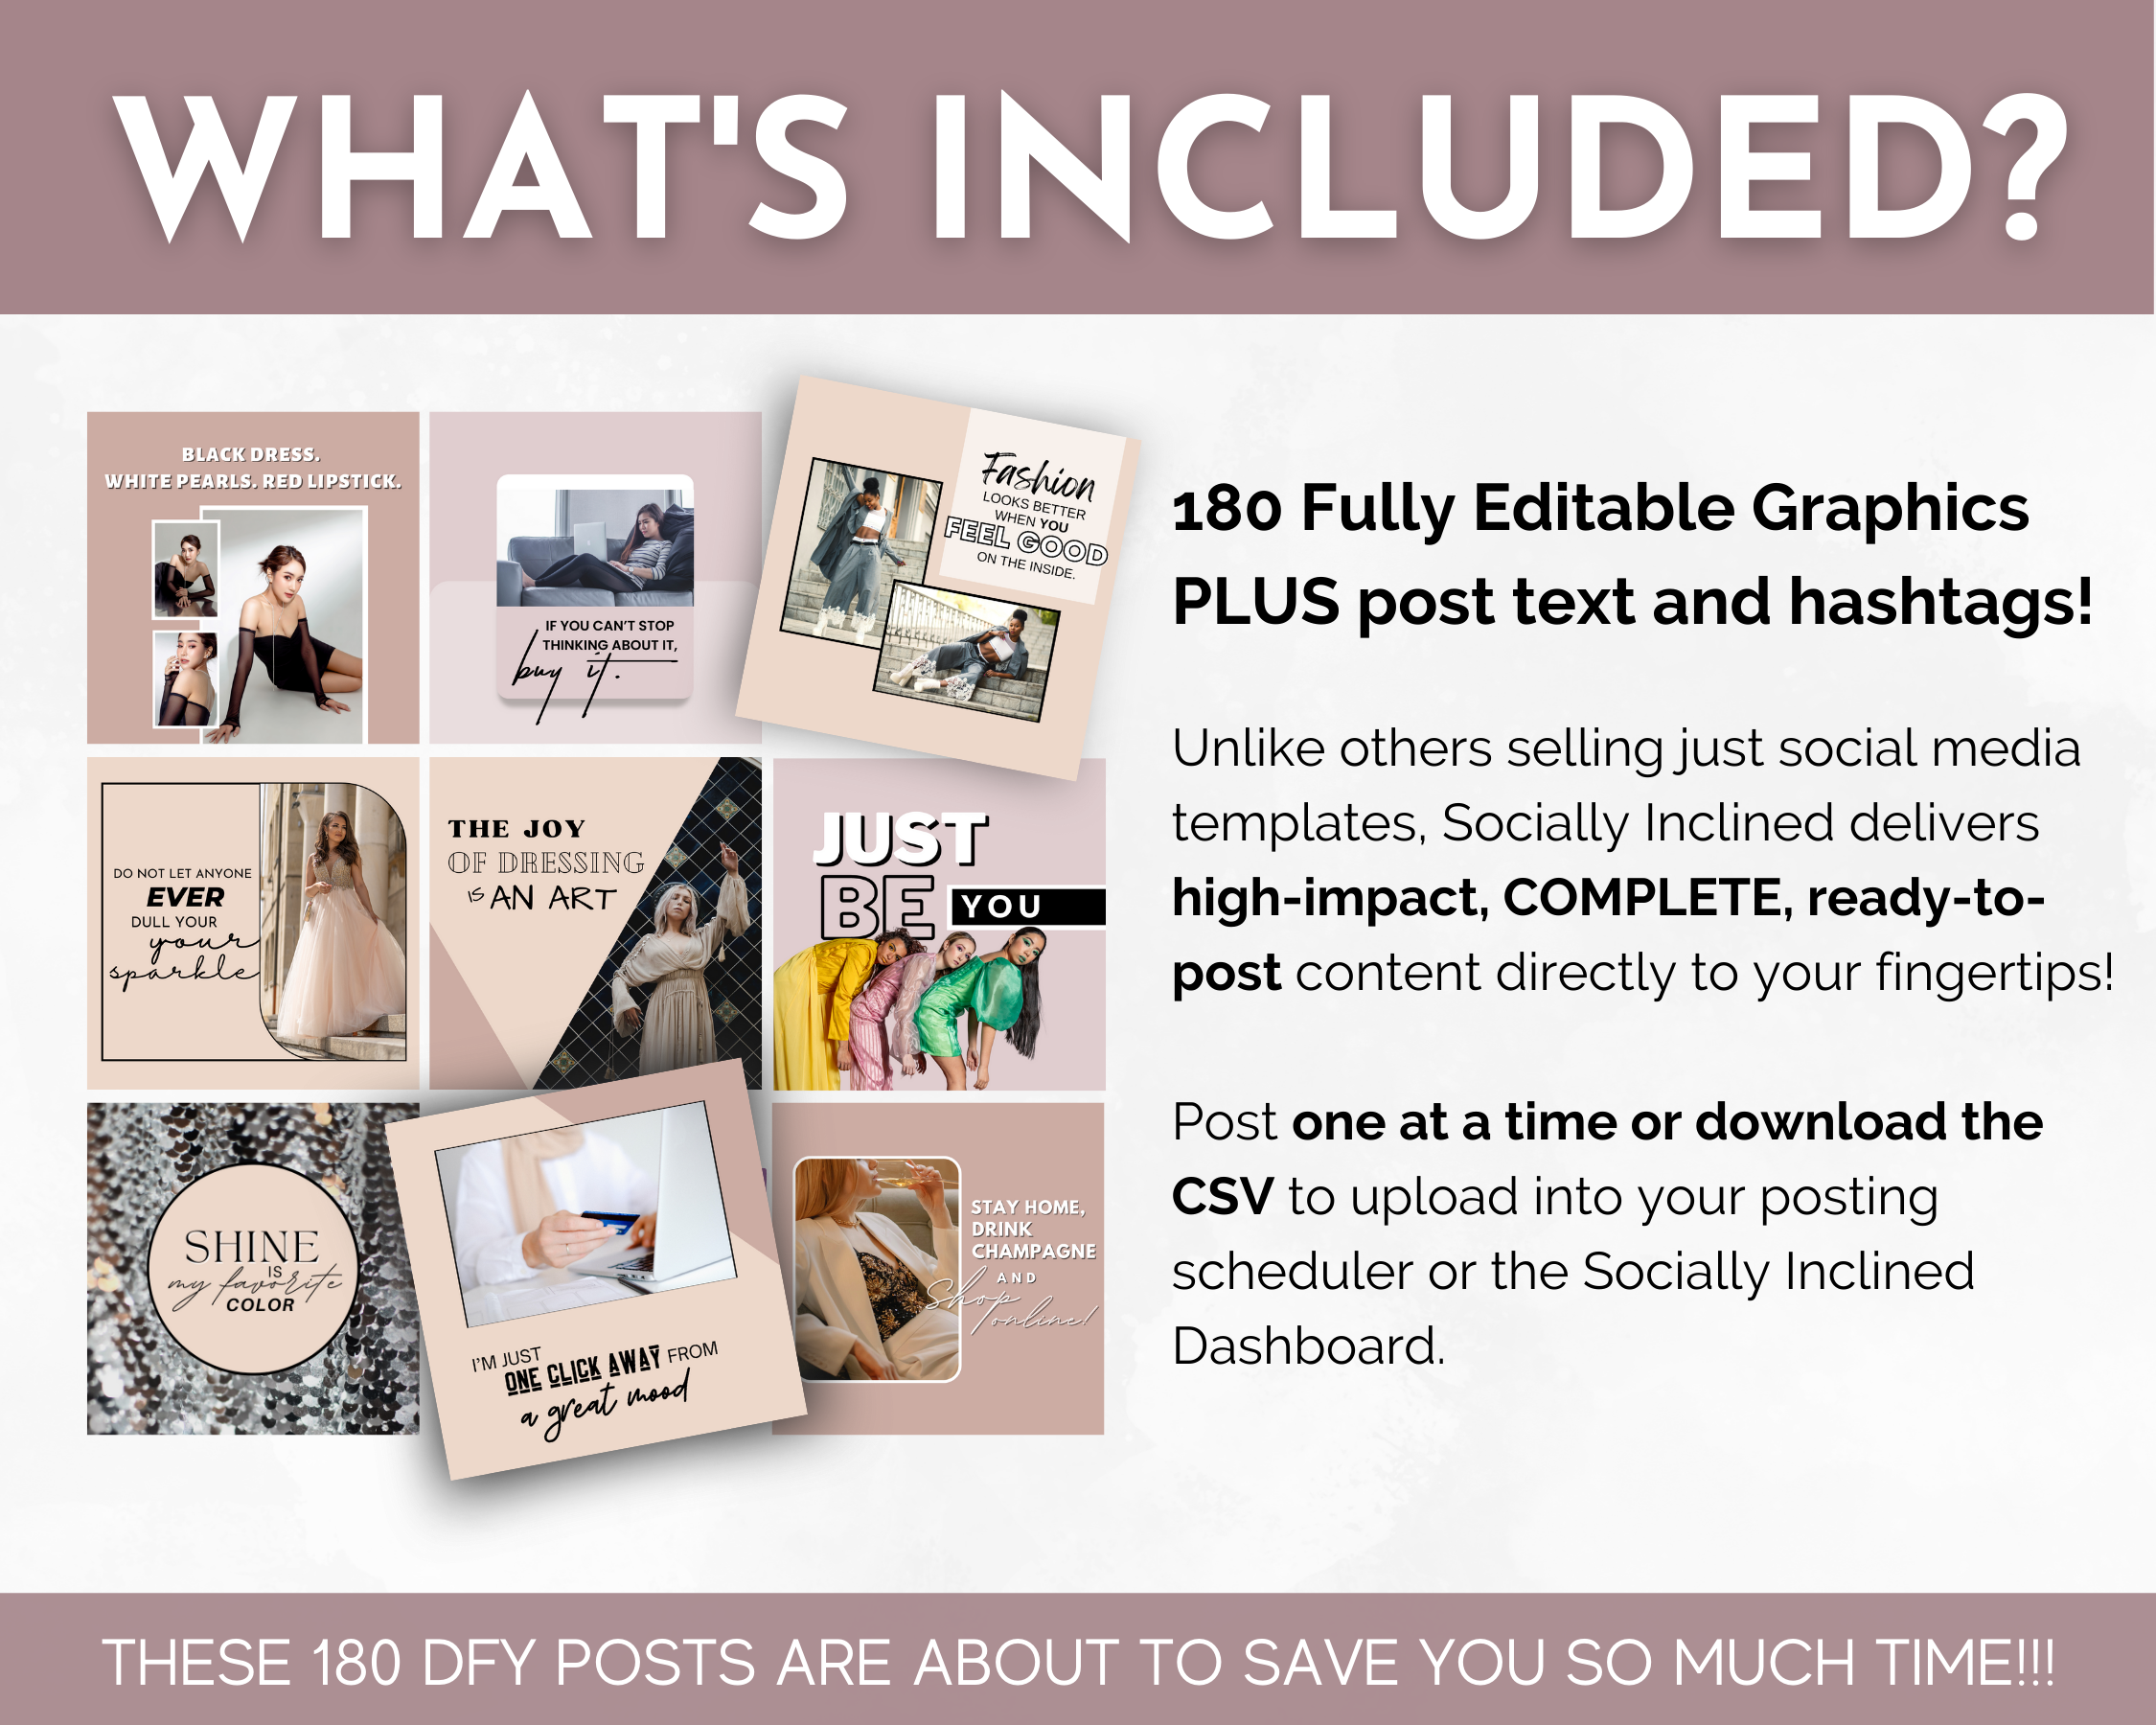 The Boutique & Style Store Social Media Post Bundle with Canva Templates from Socially Inclined includes ready-to-post text captions and social media images.